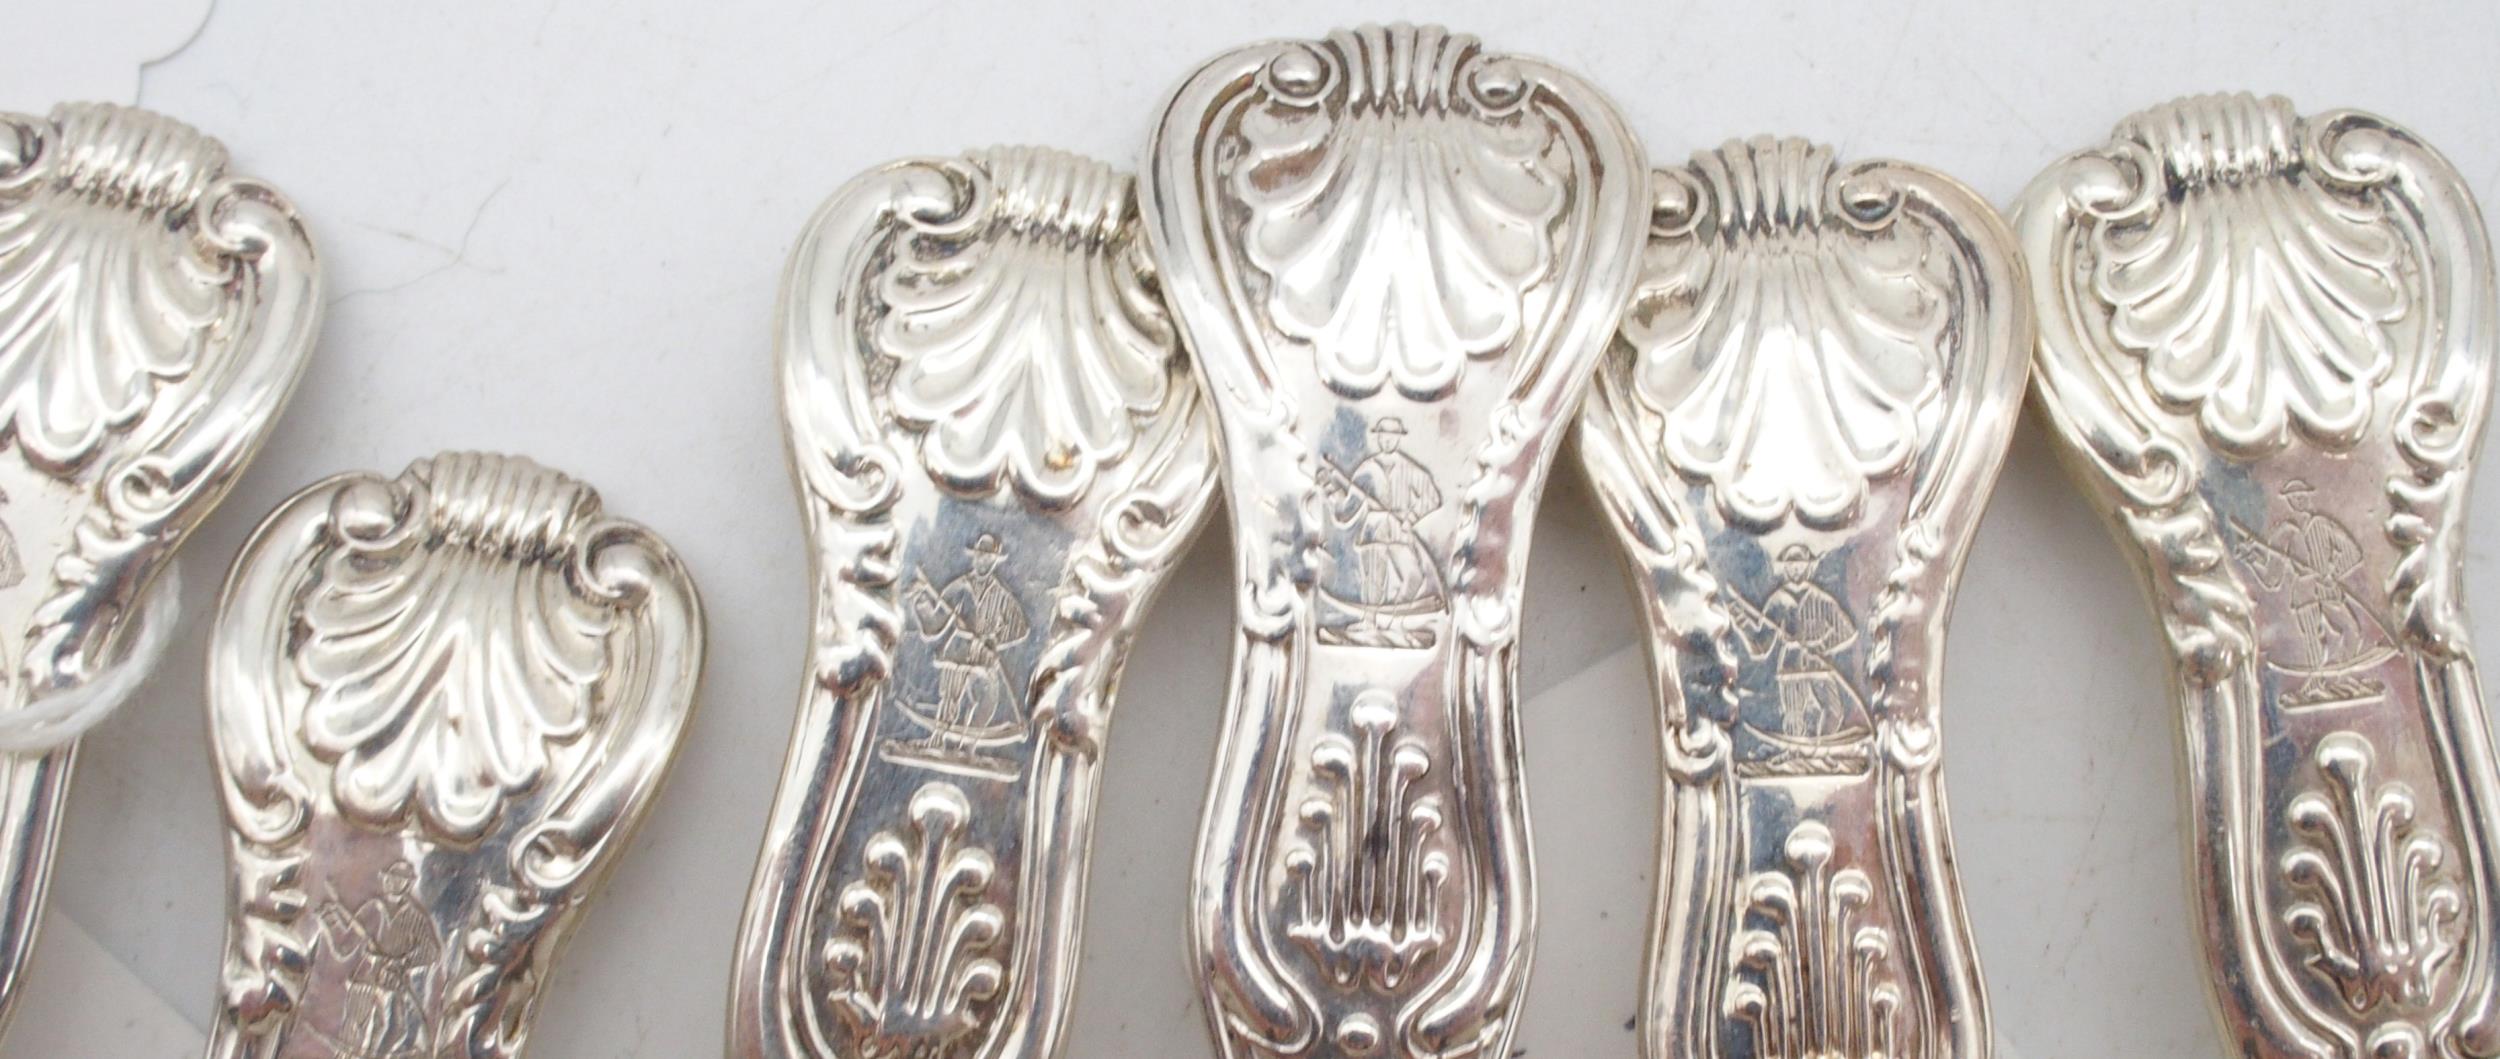 A collection of Georgian and later silver flatware, including an Old English feathered edge - Image 5 of 8